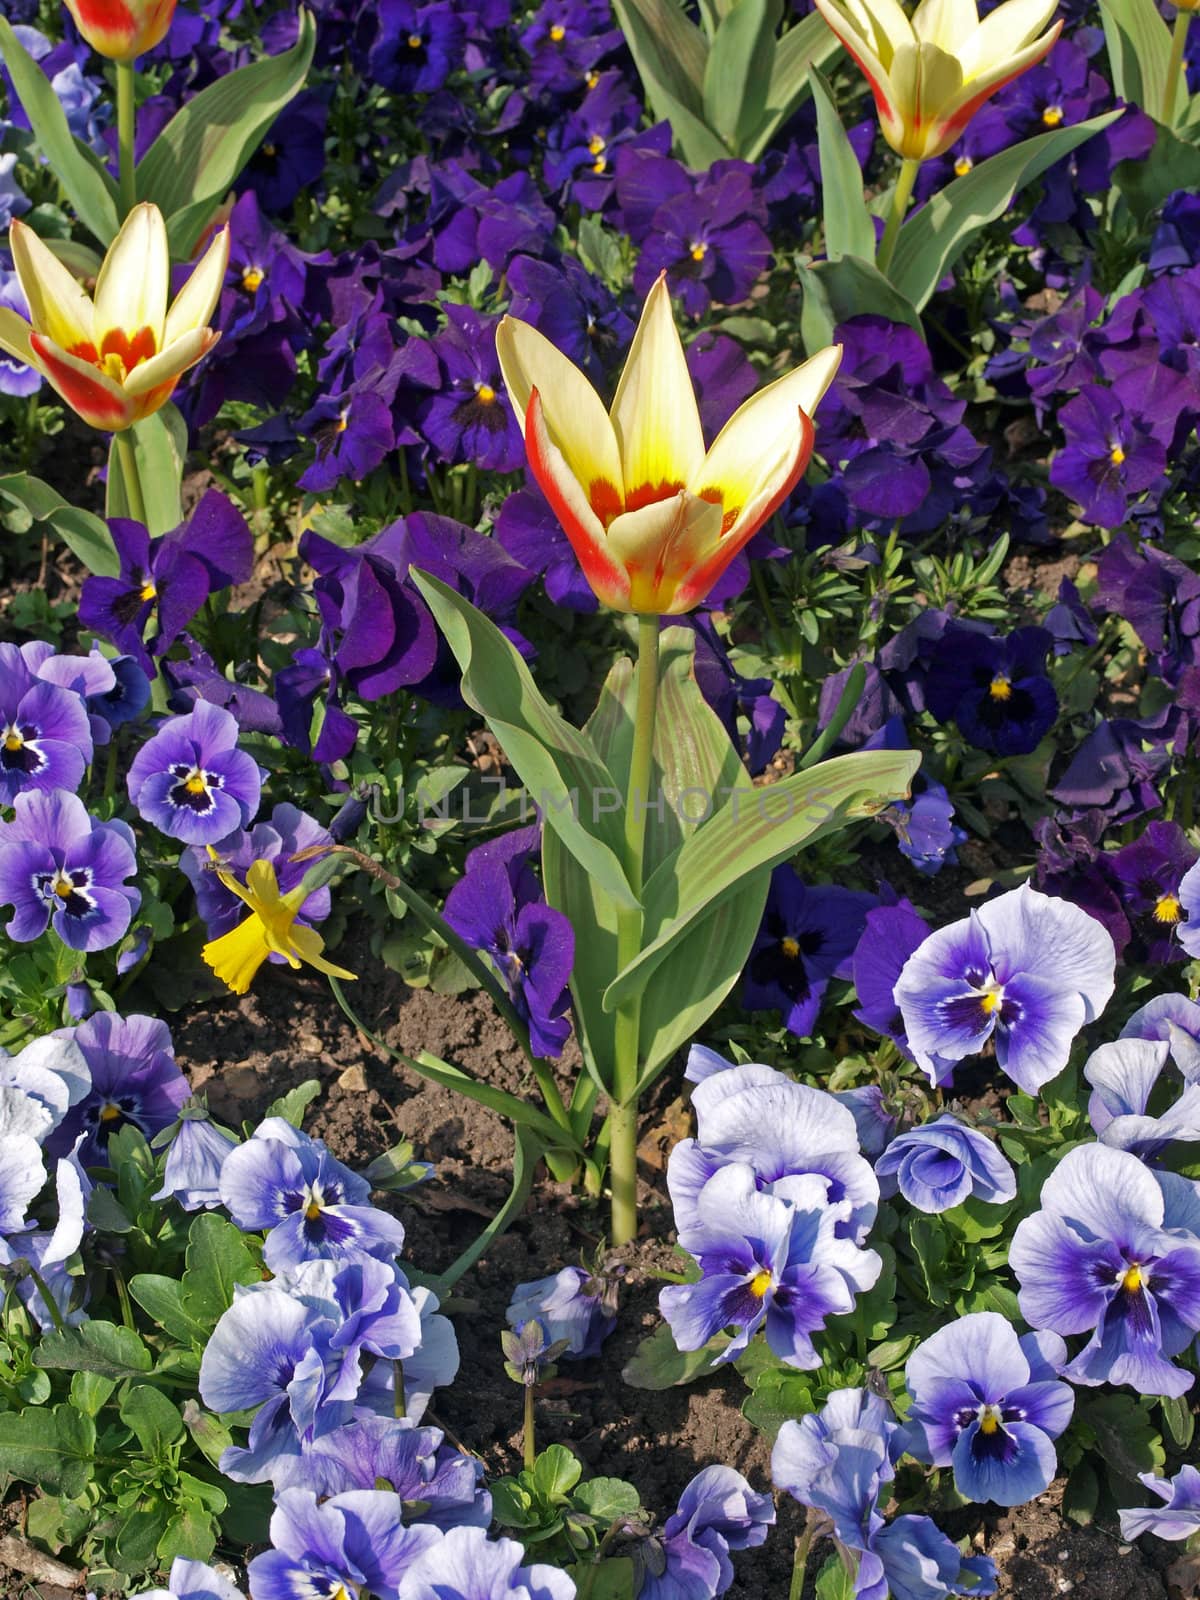 Close-up of tulips and pansies in early spring.